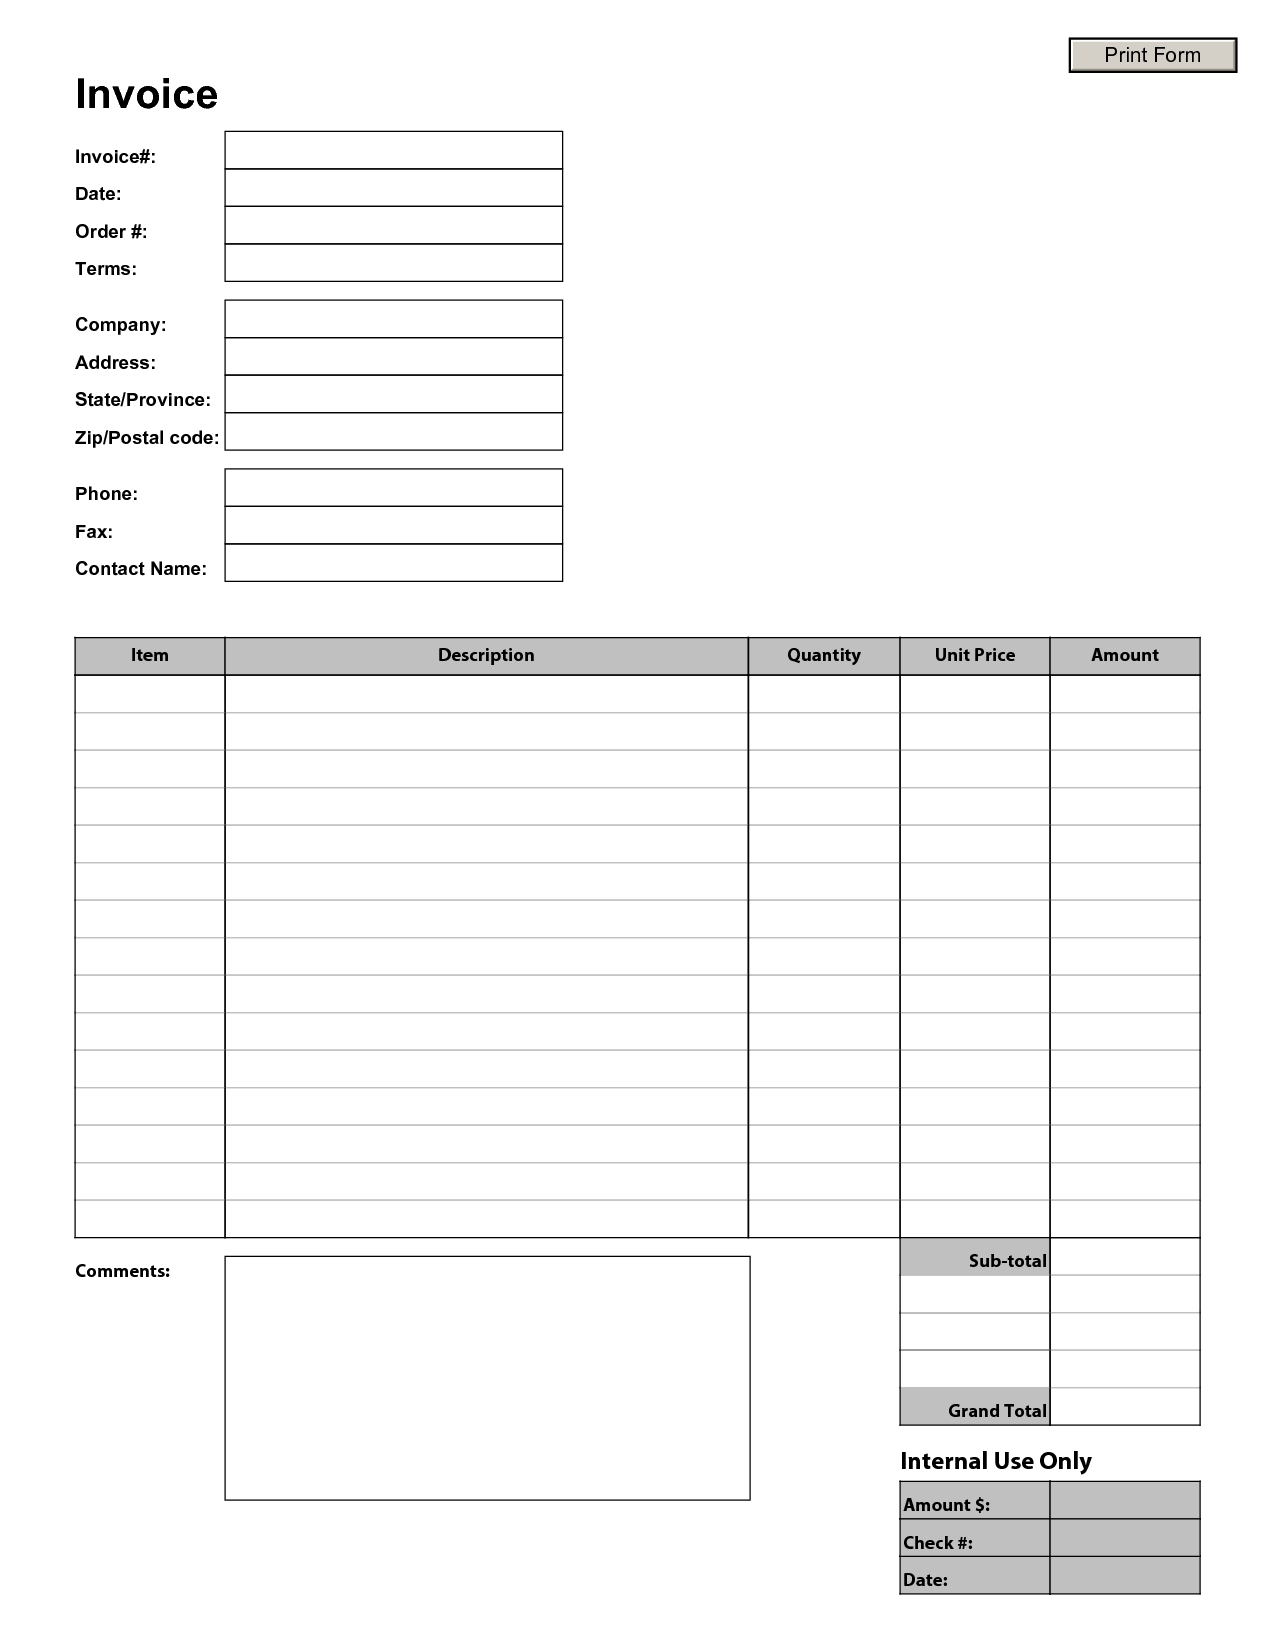 free printable invoice forms word document templates resume invoice blank form